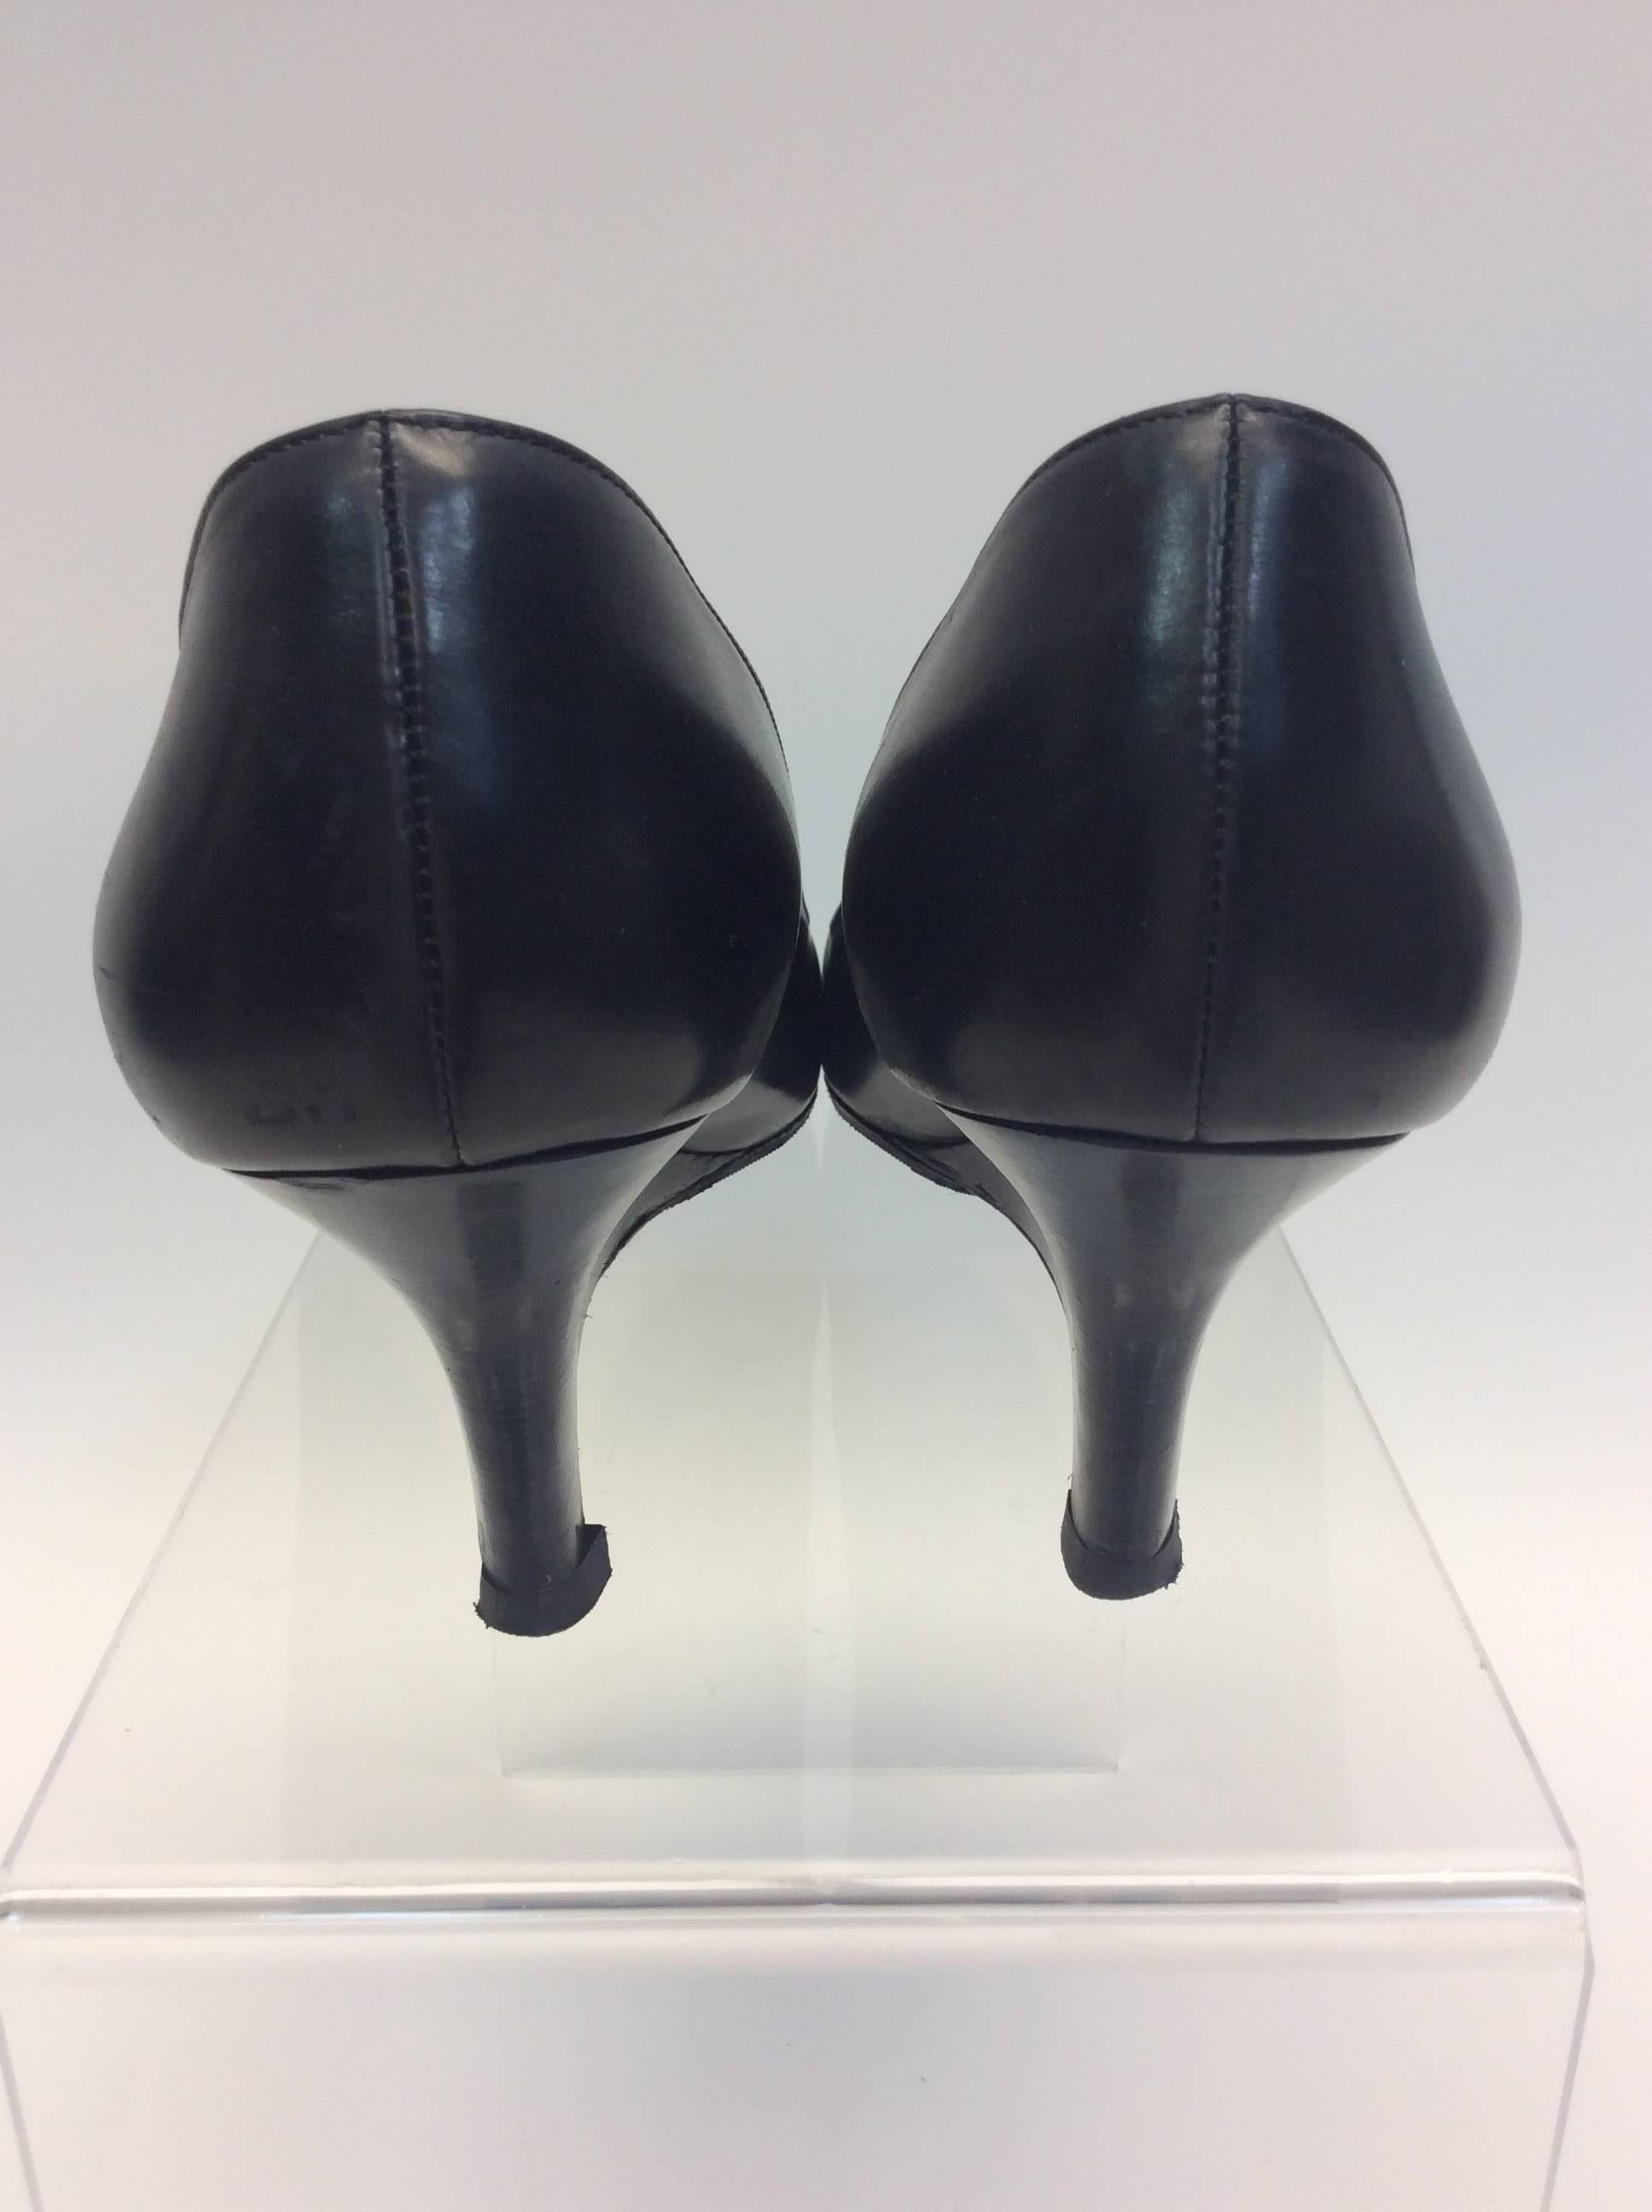 Prada Black Leather Peep Toe Wedge In Excellent Condition For Sale In Narberth, PA